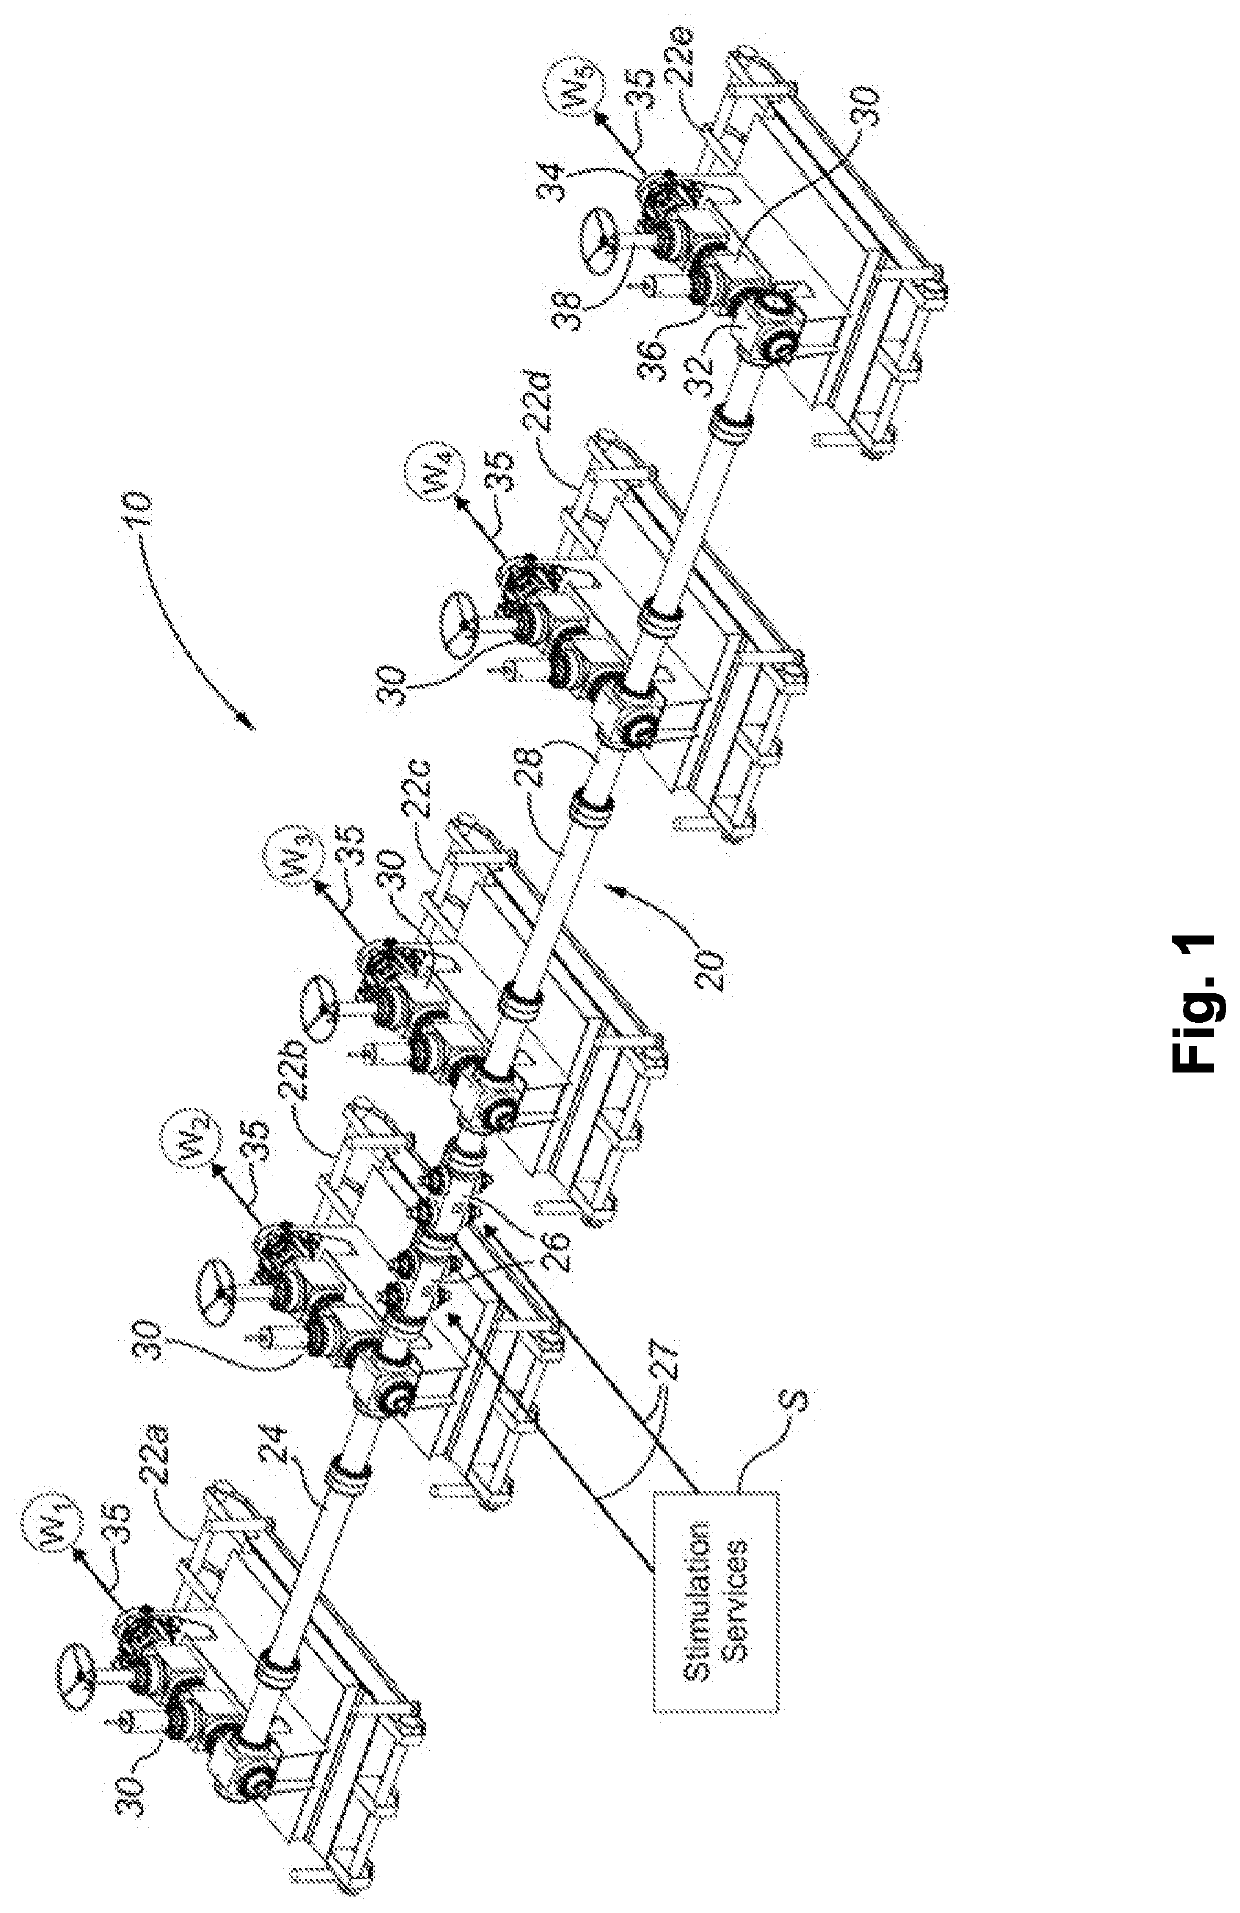 Adjustable Fracturing Manifold Module, System and Method